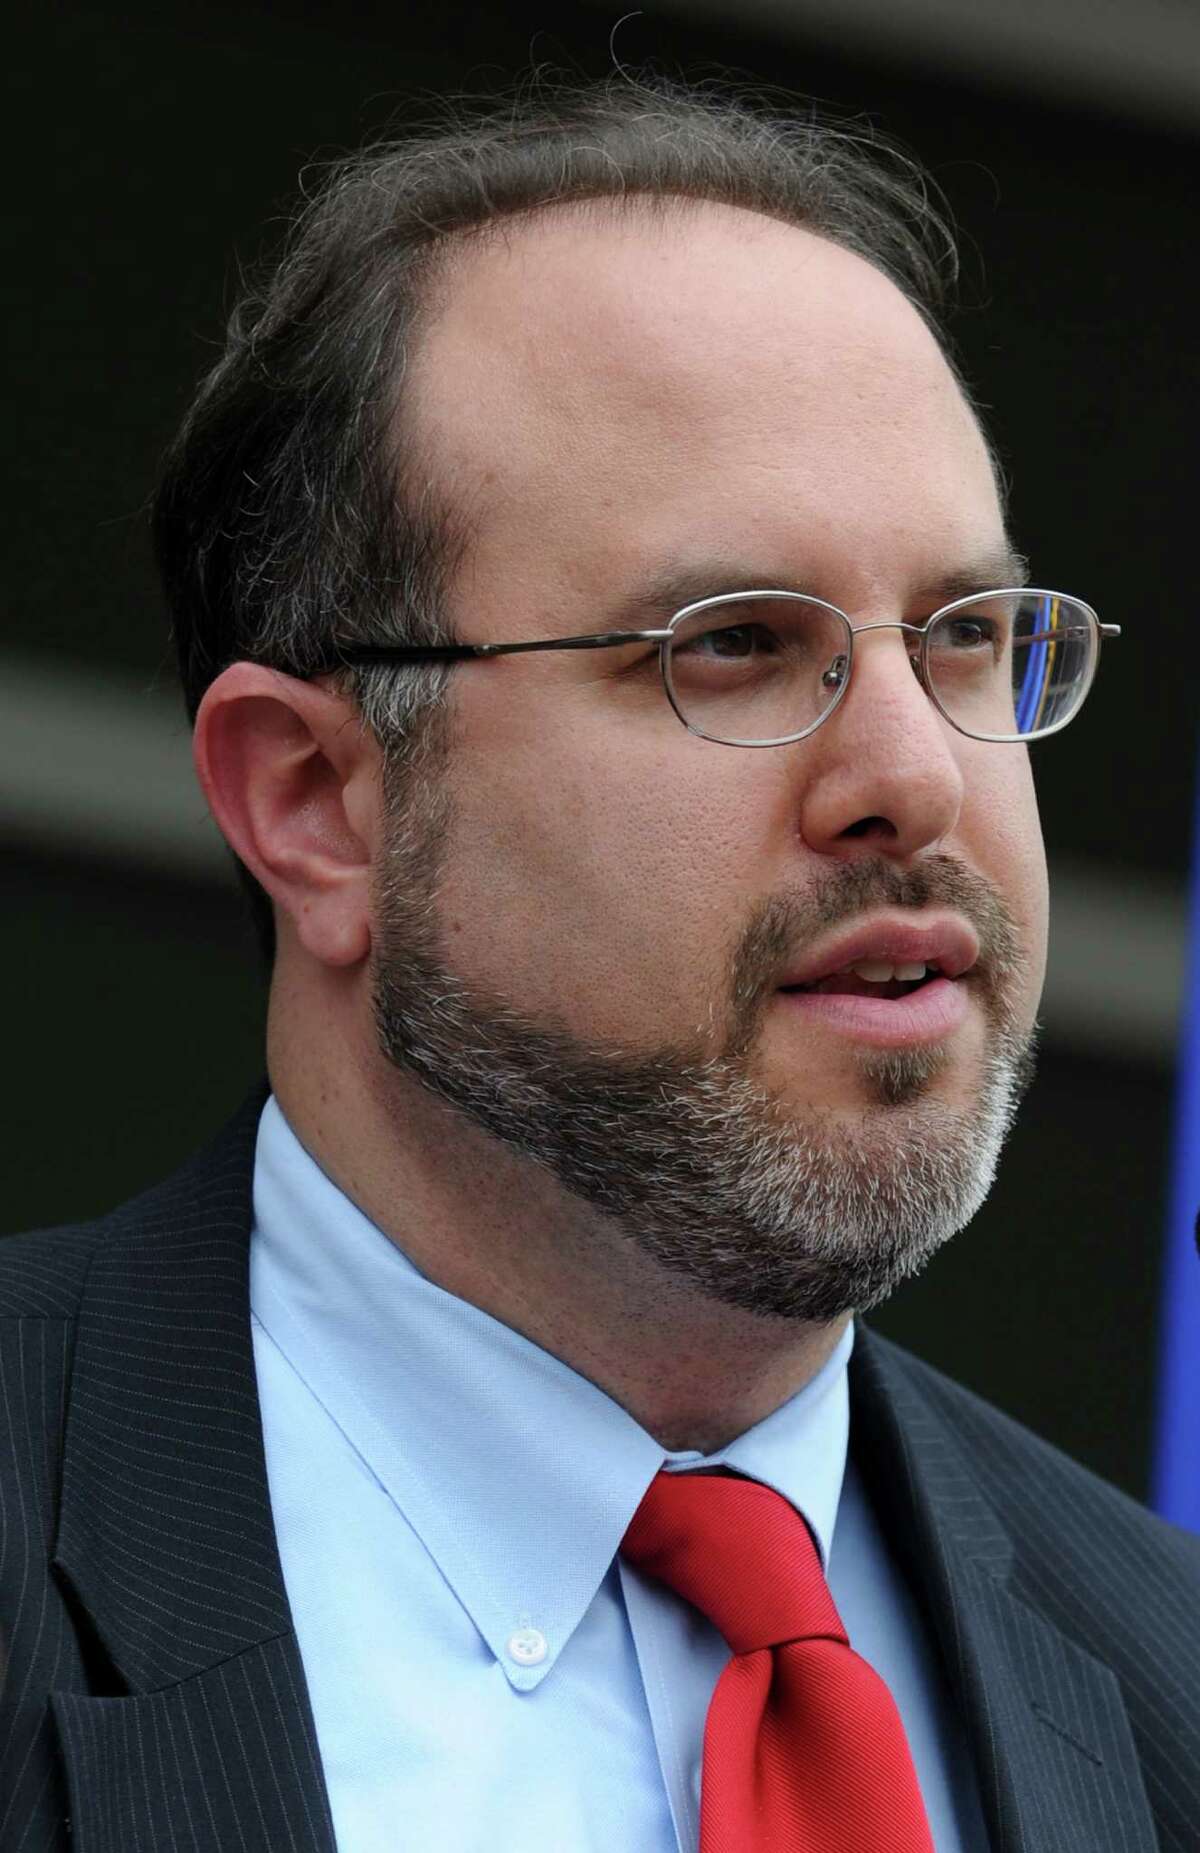 Stefan Pryor, the controversial state Department of Education commissioner since September of 2011, announced that he will not be seeking a second term.